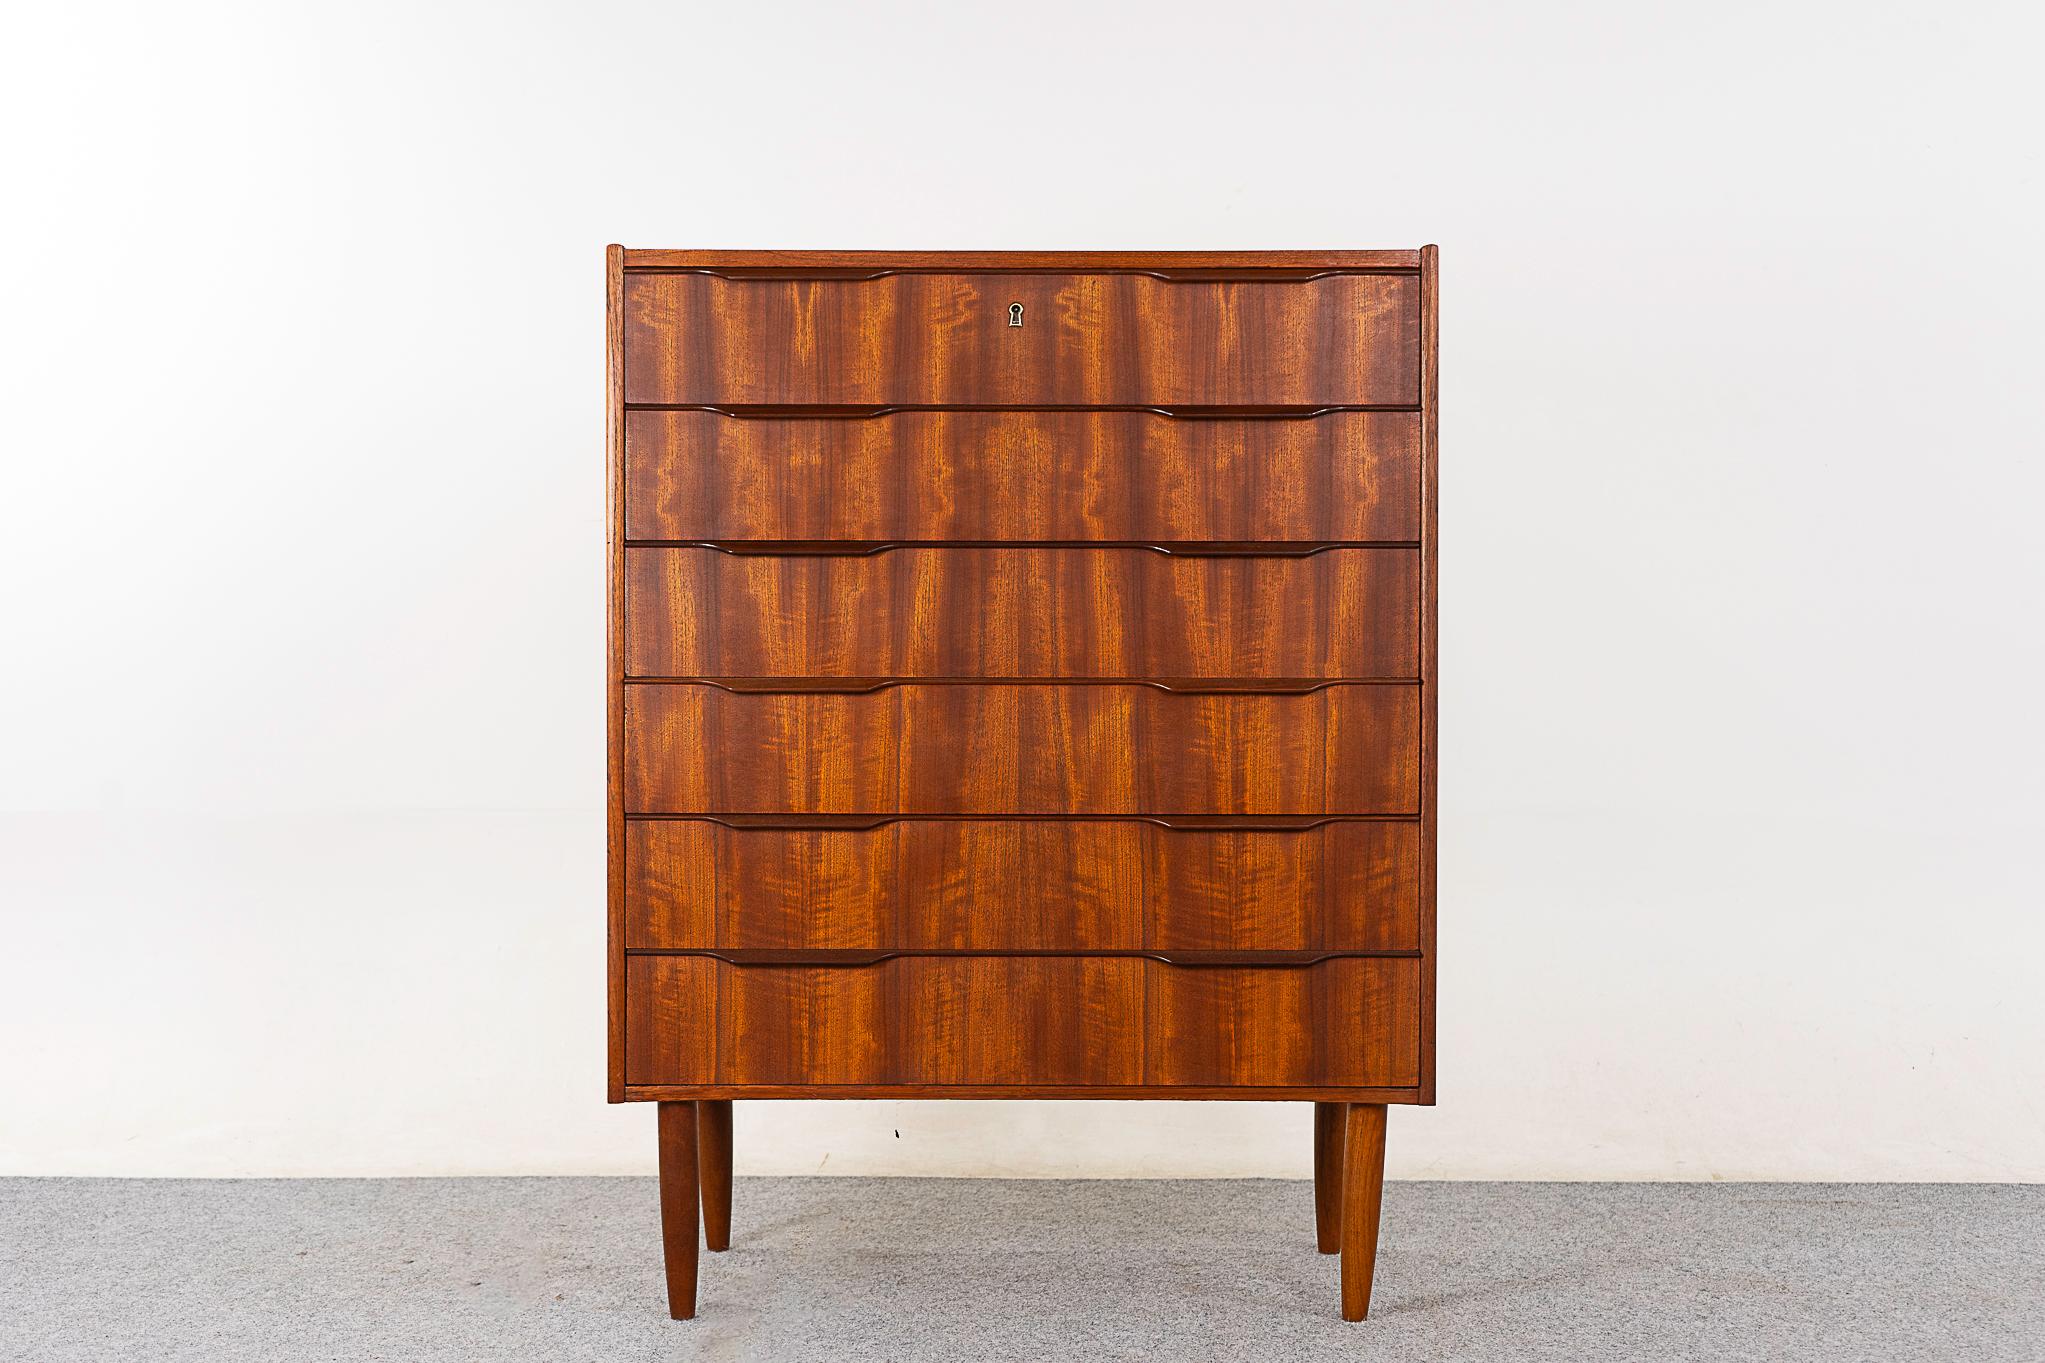 Teak Danish dresser, circa 1960's. Solid wood edging and beautiful book-matched veneer drawer faces. Integrated, horizontal drawer pulls, dovetail construction and sleek legs!


